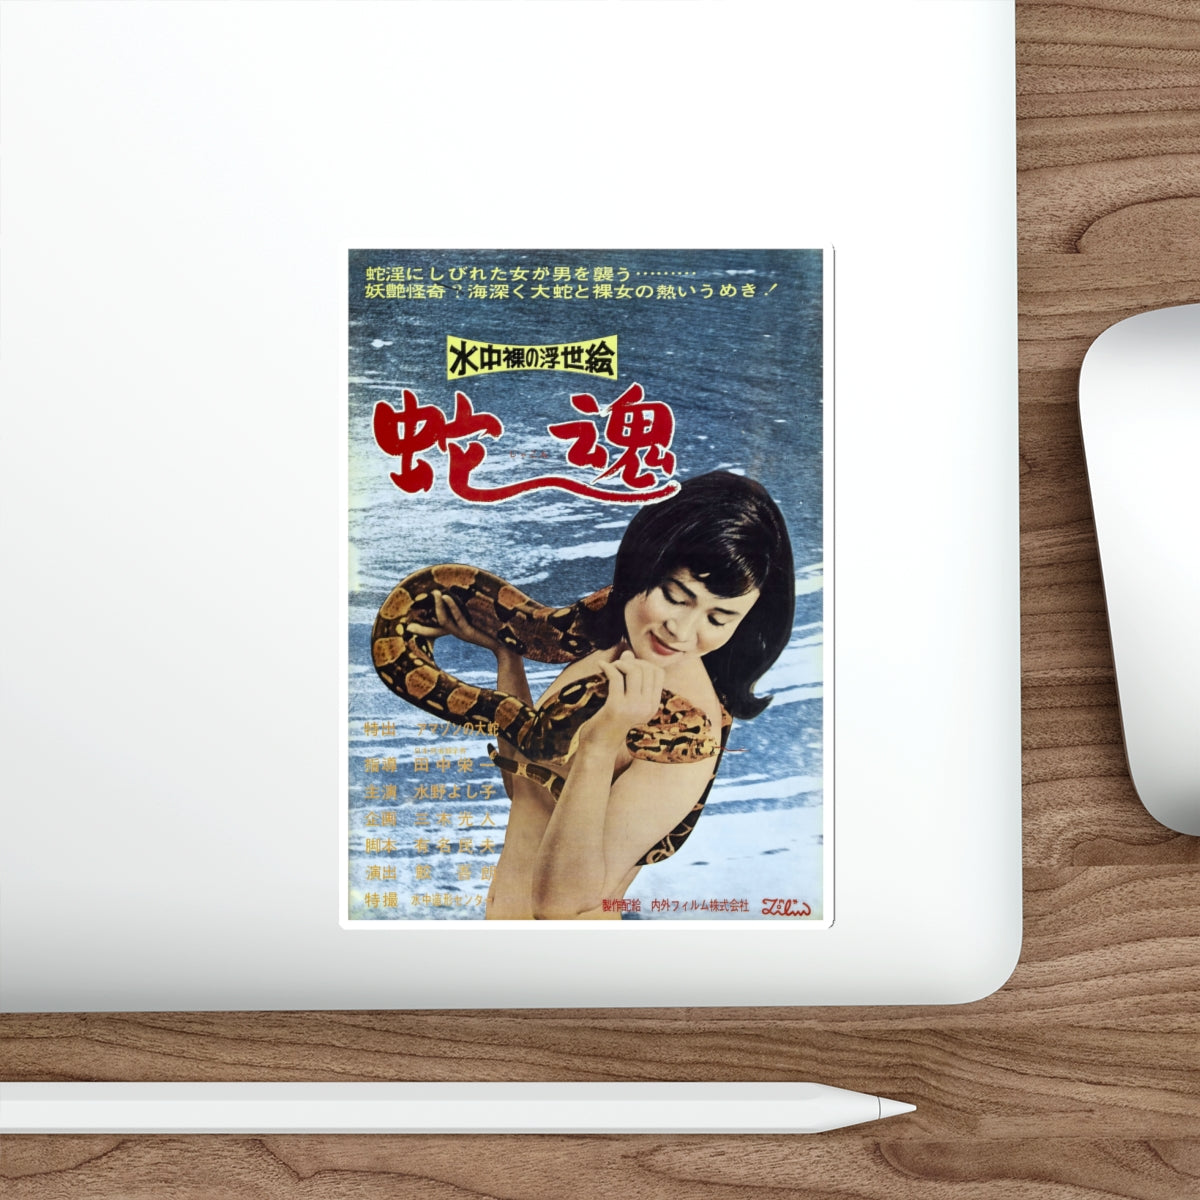 UNDERWATER NUDE PICTURES OF THE FLOATING WORLD SPIRIT OF THE SNAKE (ASIAN) Movie Poster STICKER Vinyl Die-Cut Decal-The Sticker Space